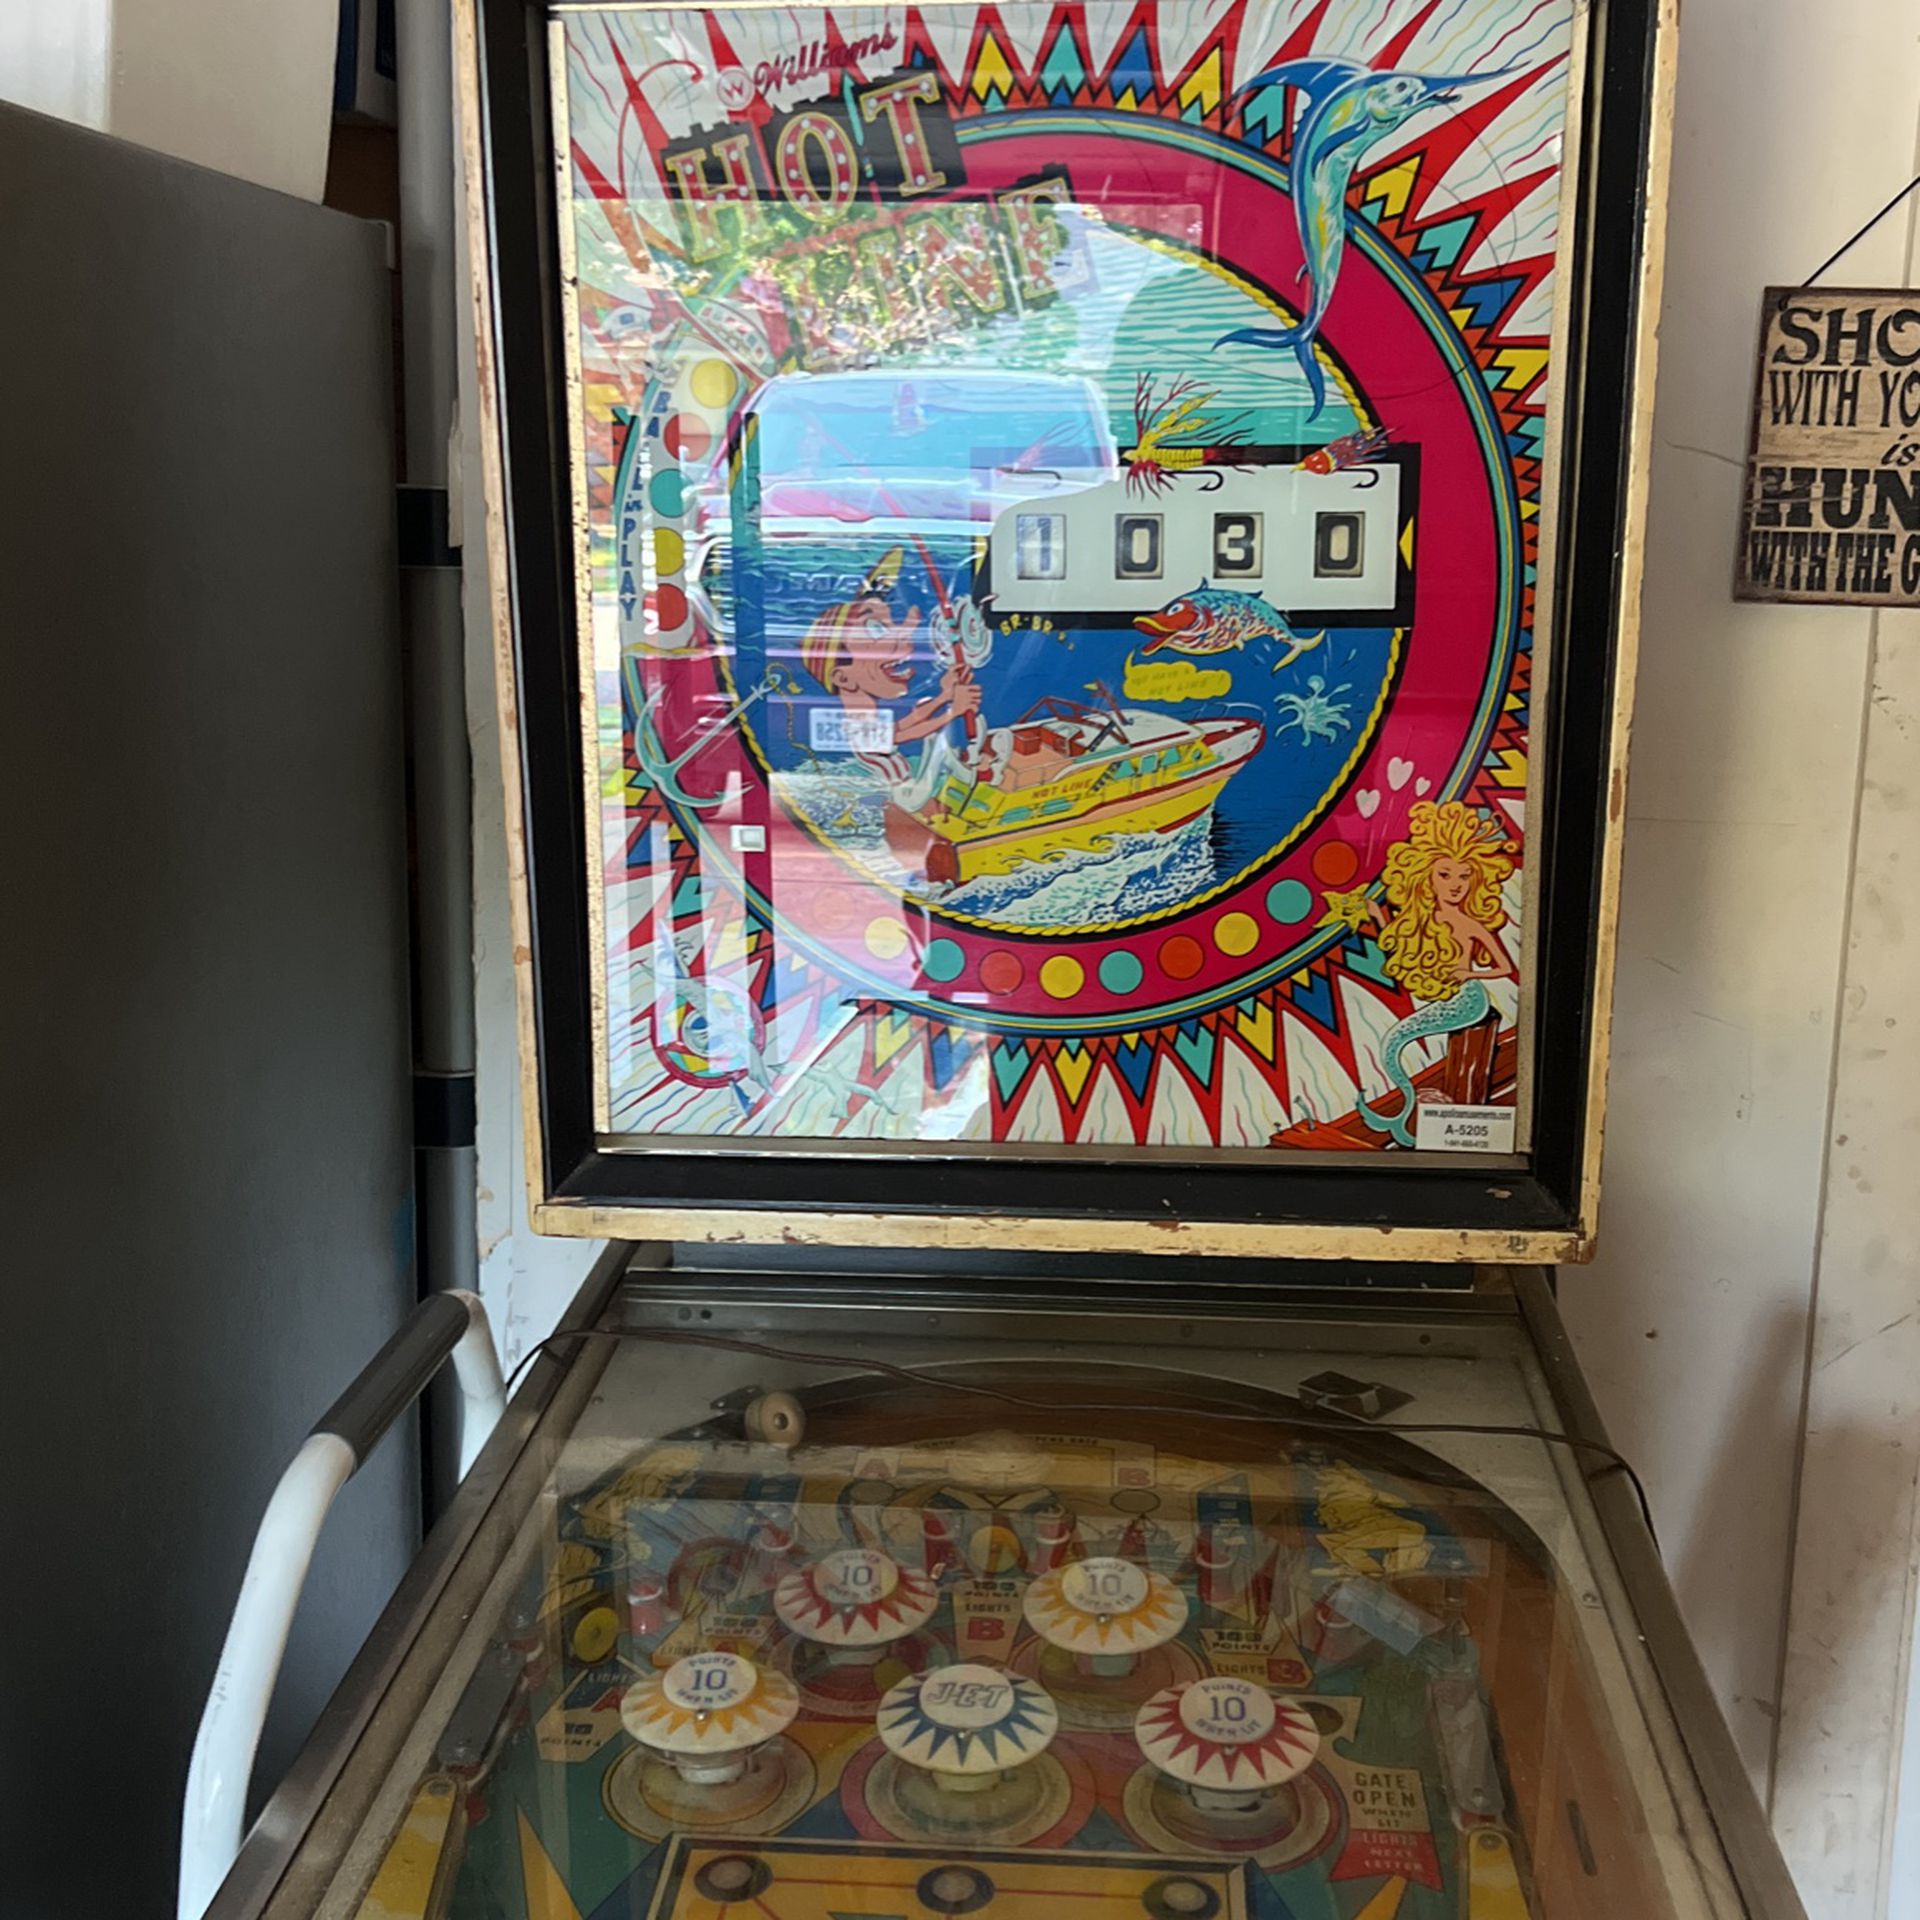 1960 Hotline pinball machine for sale $2000 or best offer